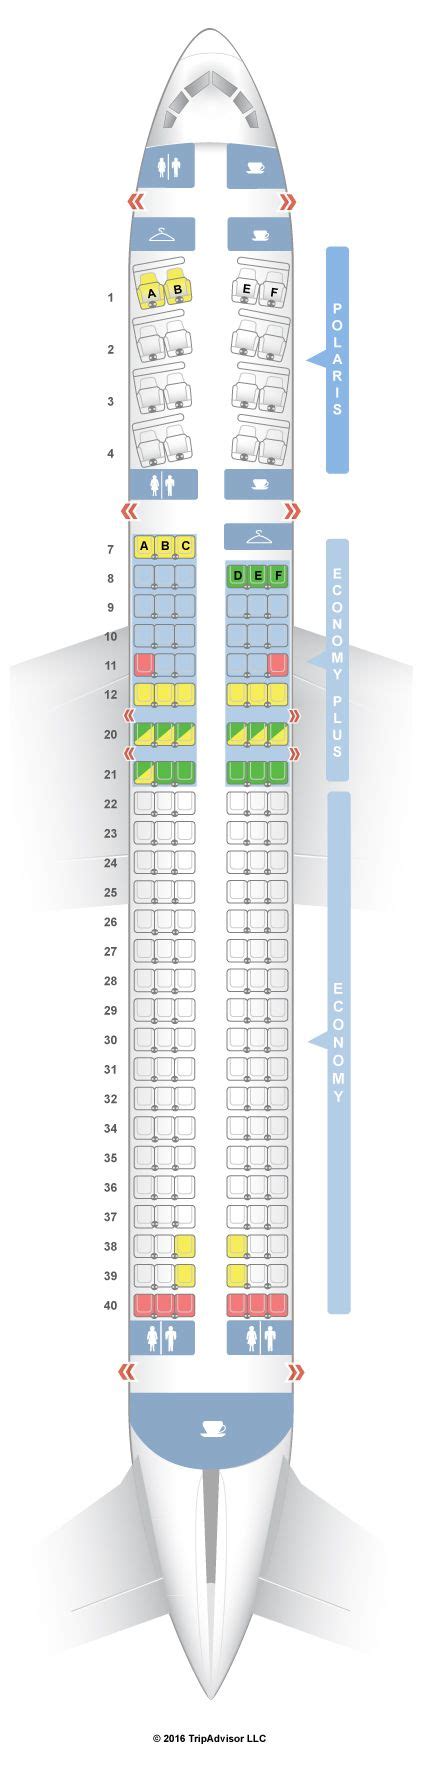 boeing 757 62 seating chart